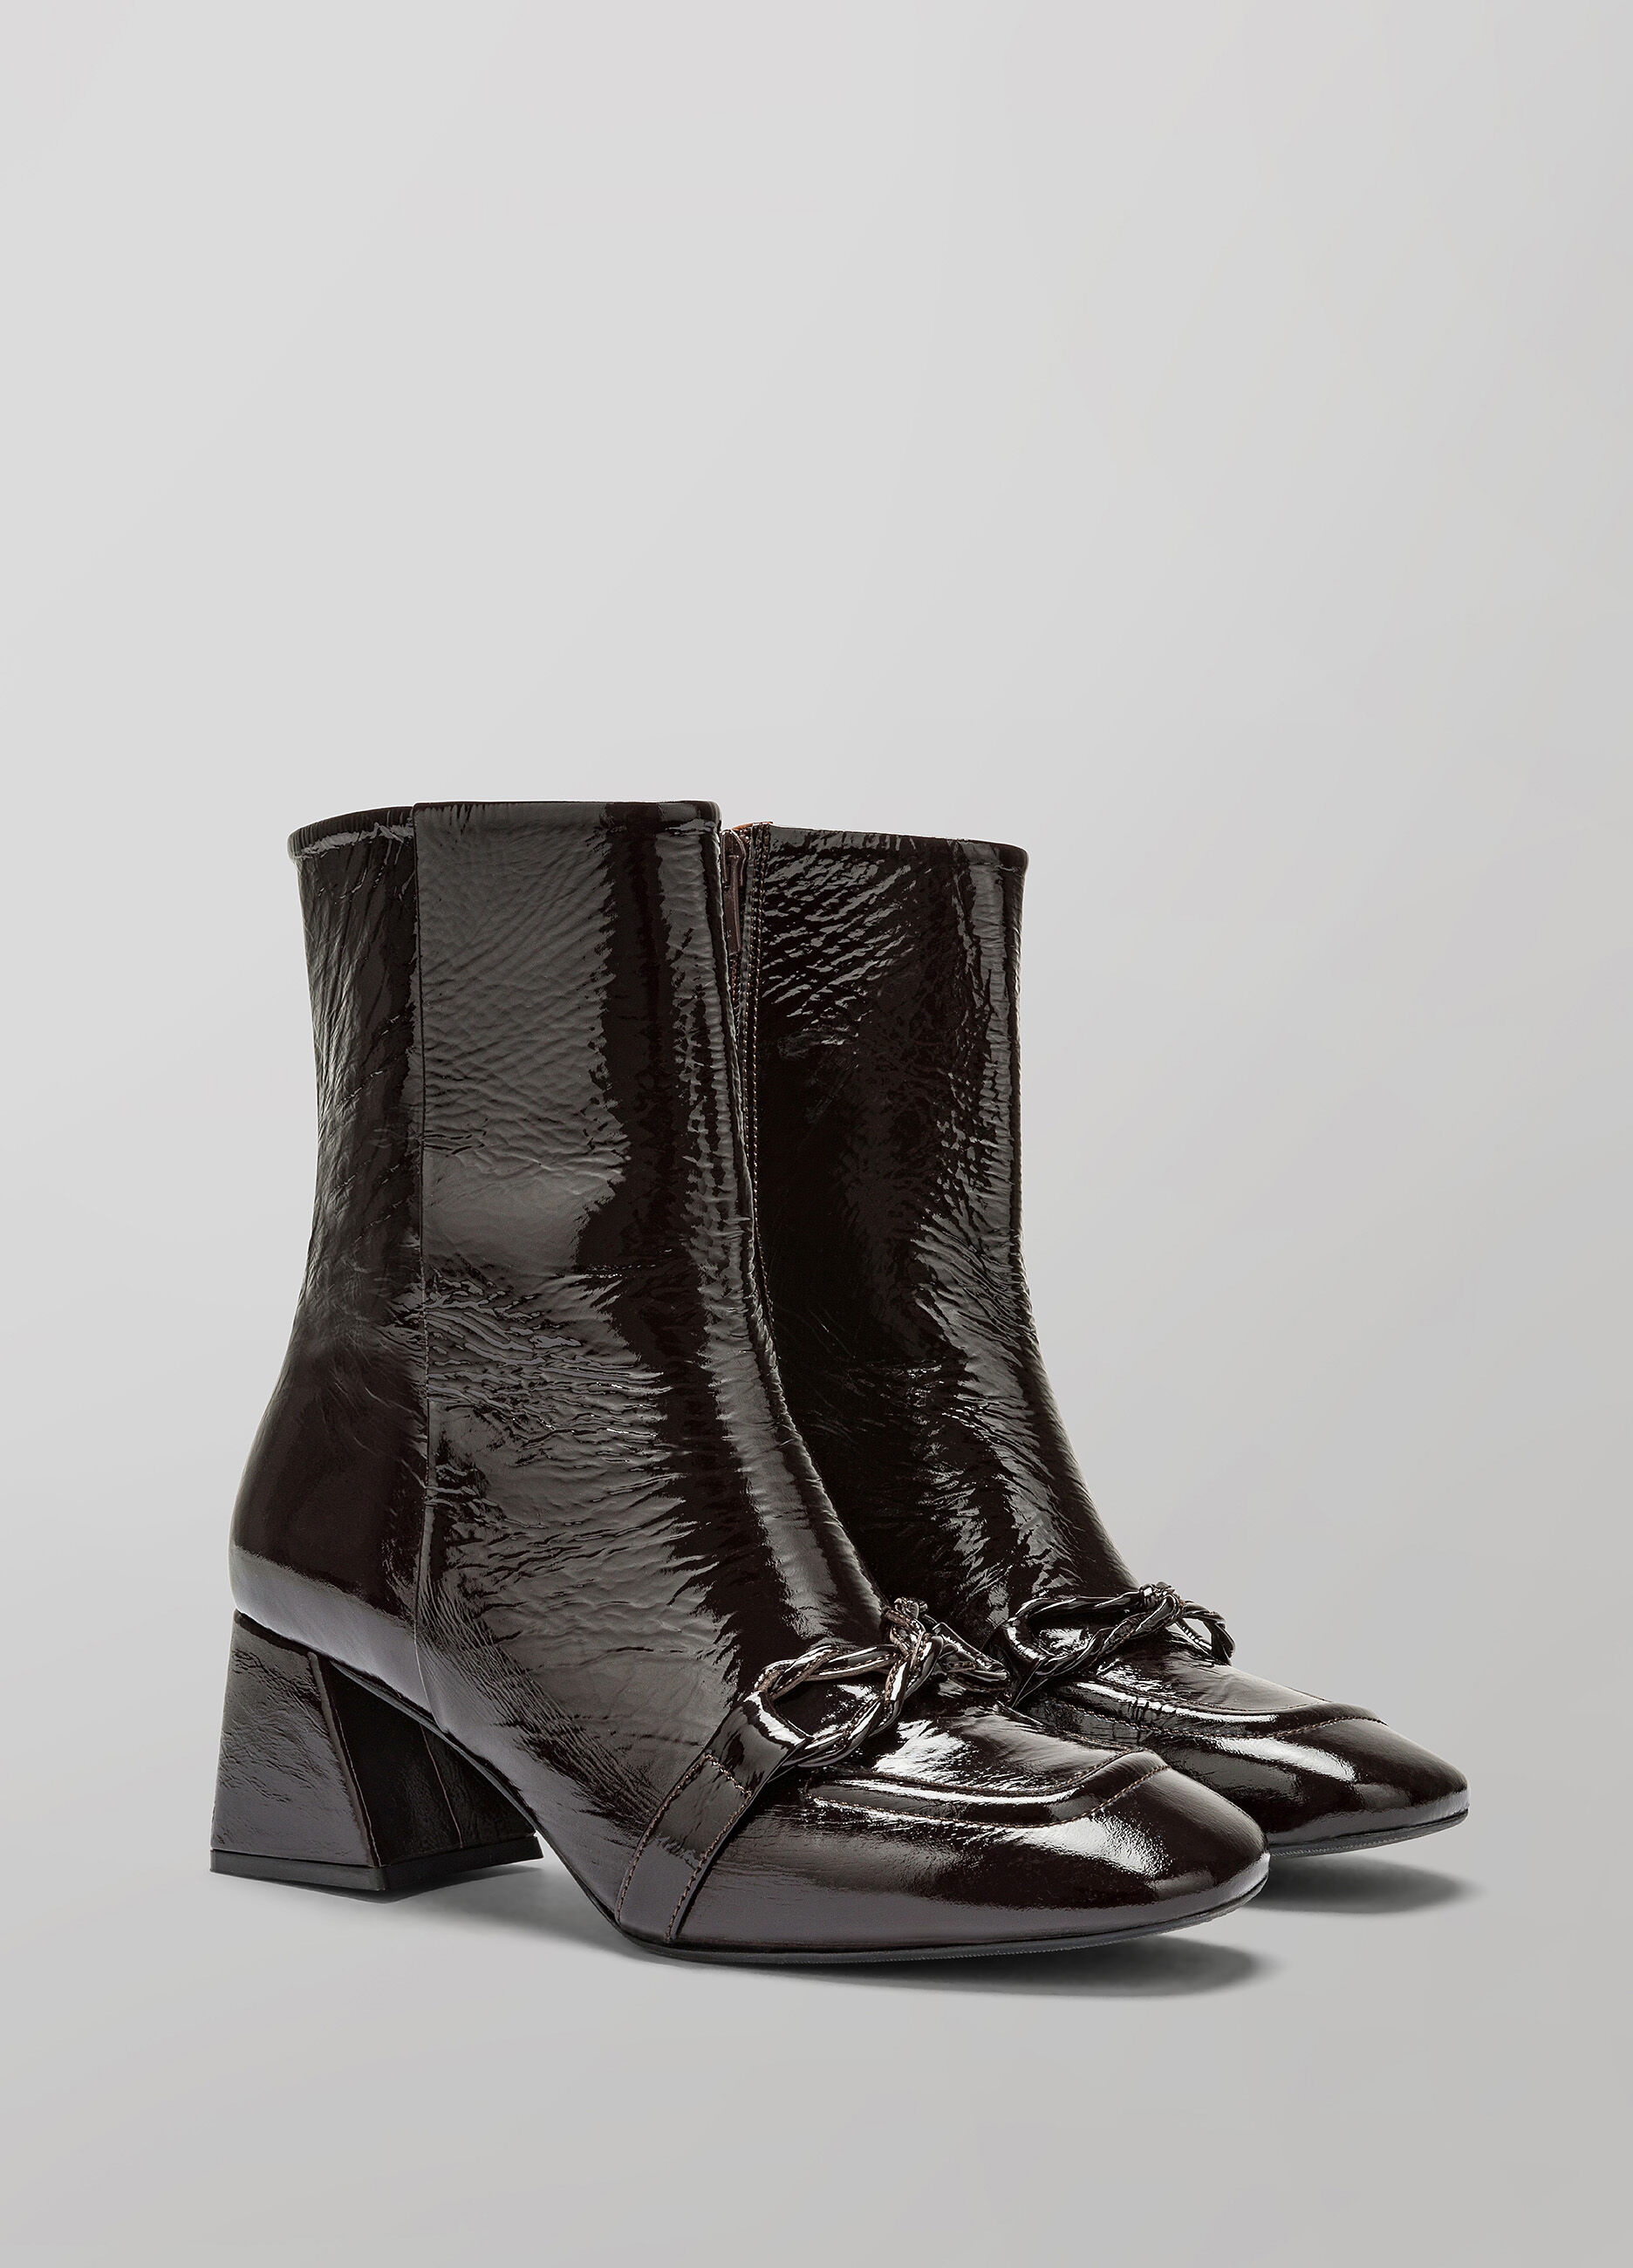 Patent leather naplak ankle boot